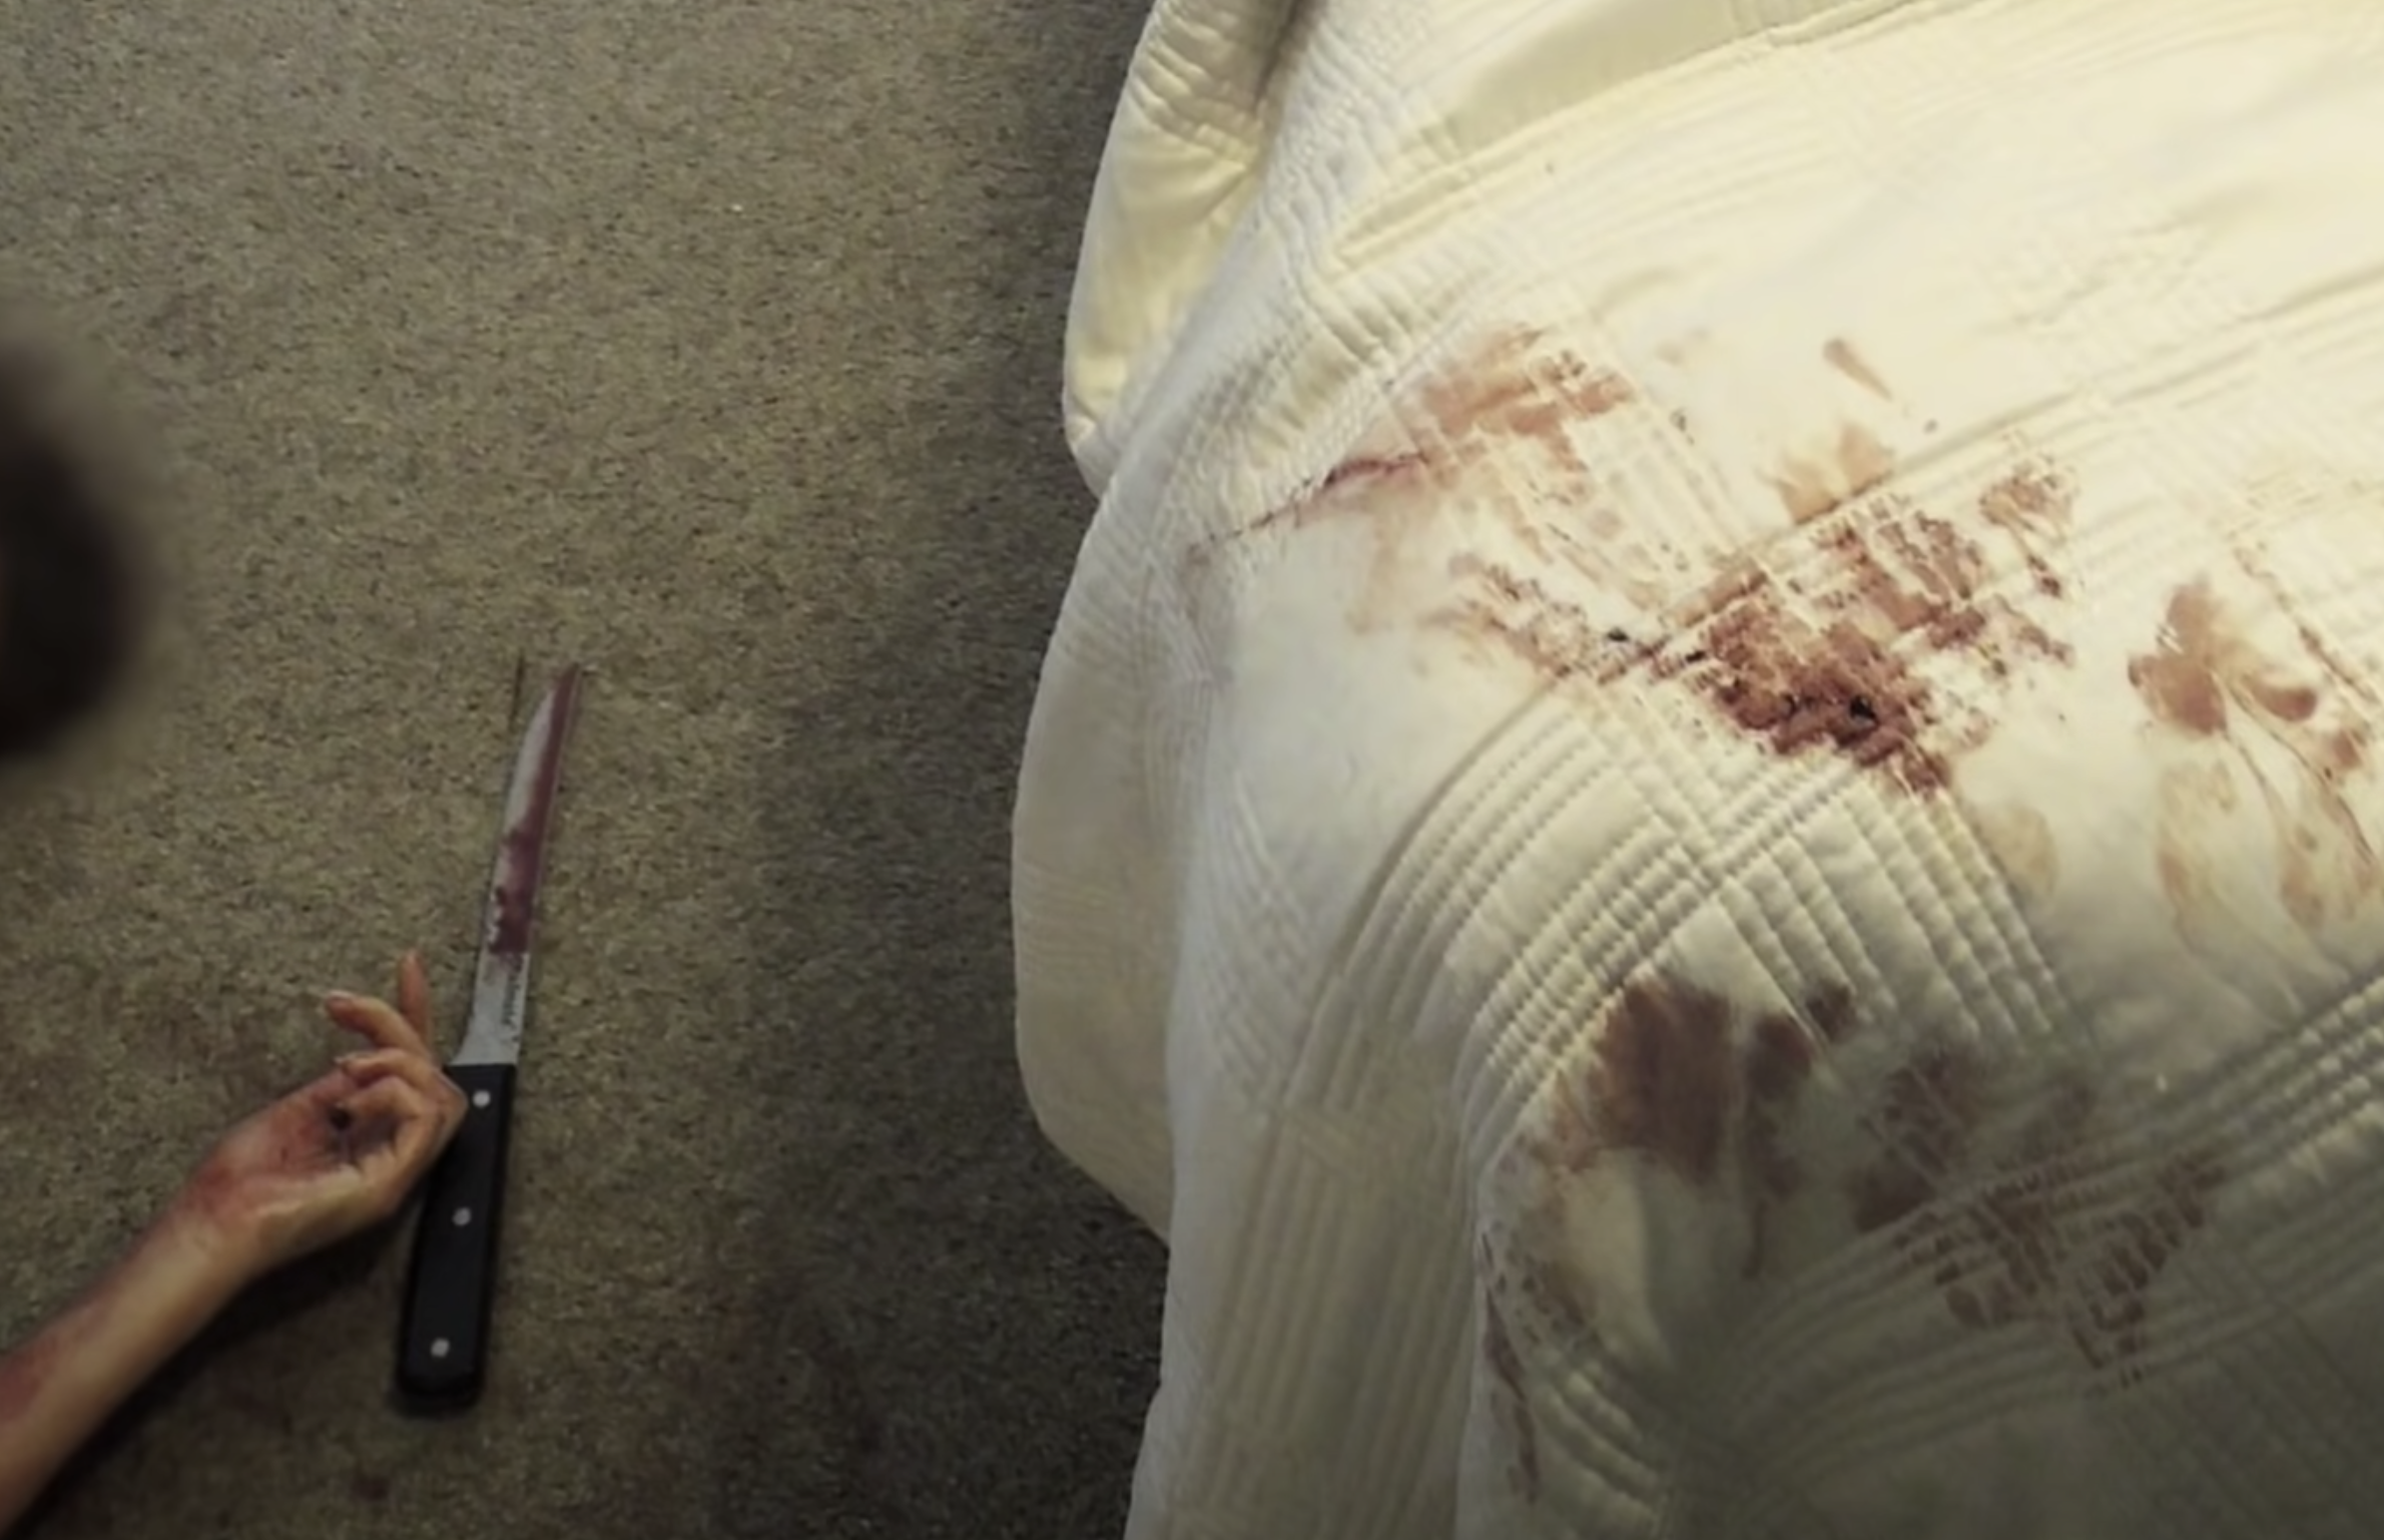 Crime scene photo of a dead woman&#x27;s arm next to a bloody knife and blood-stained bed